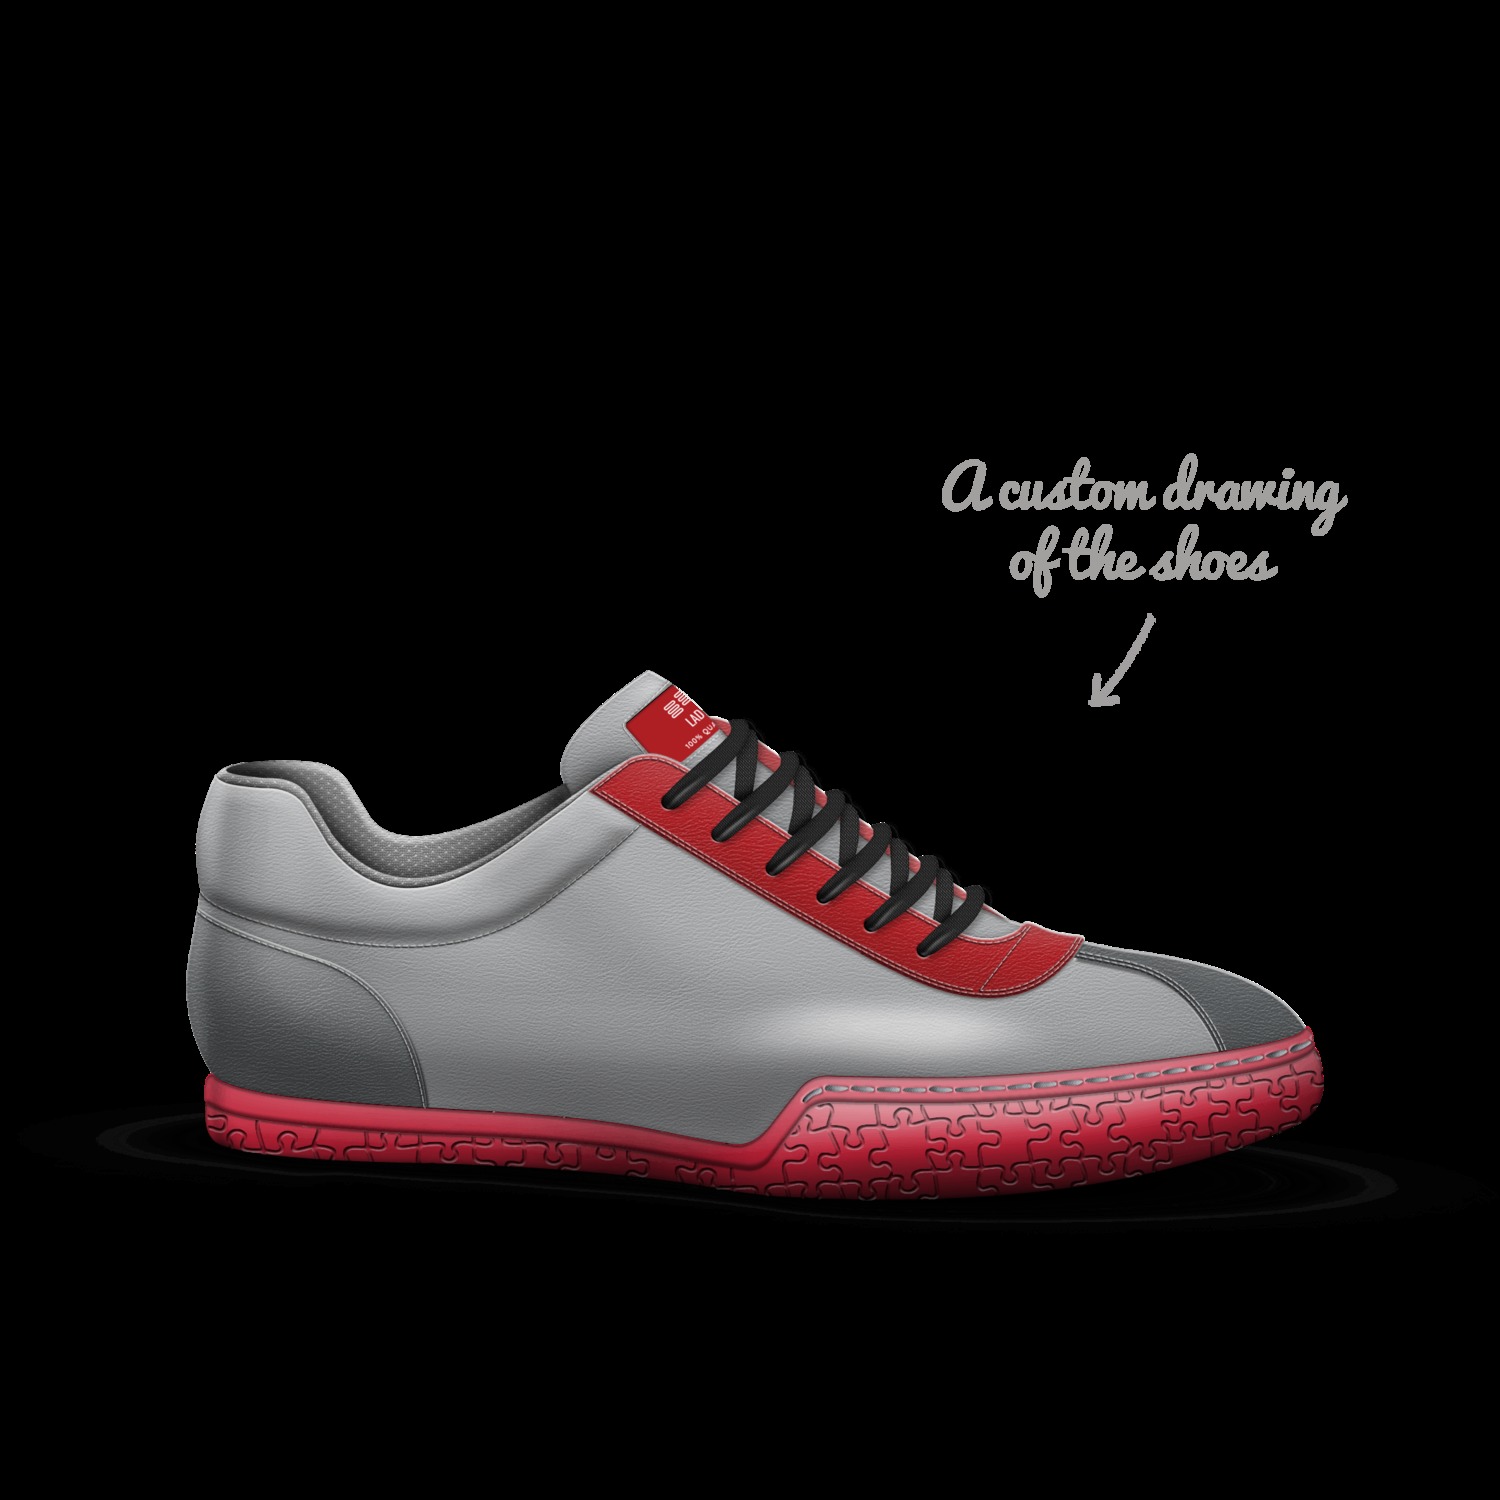 LAD | A Custom Shoe concept by David Conkle